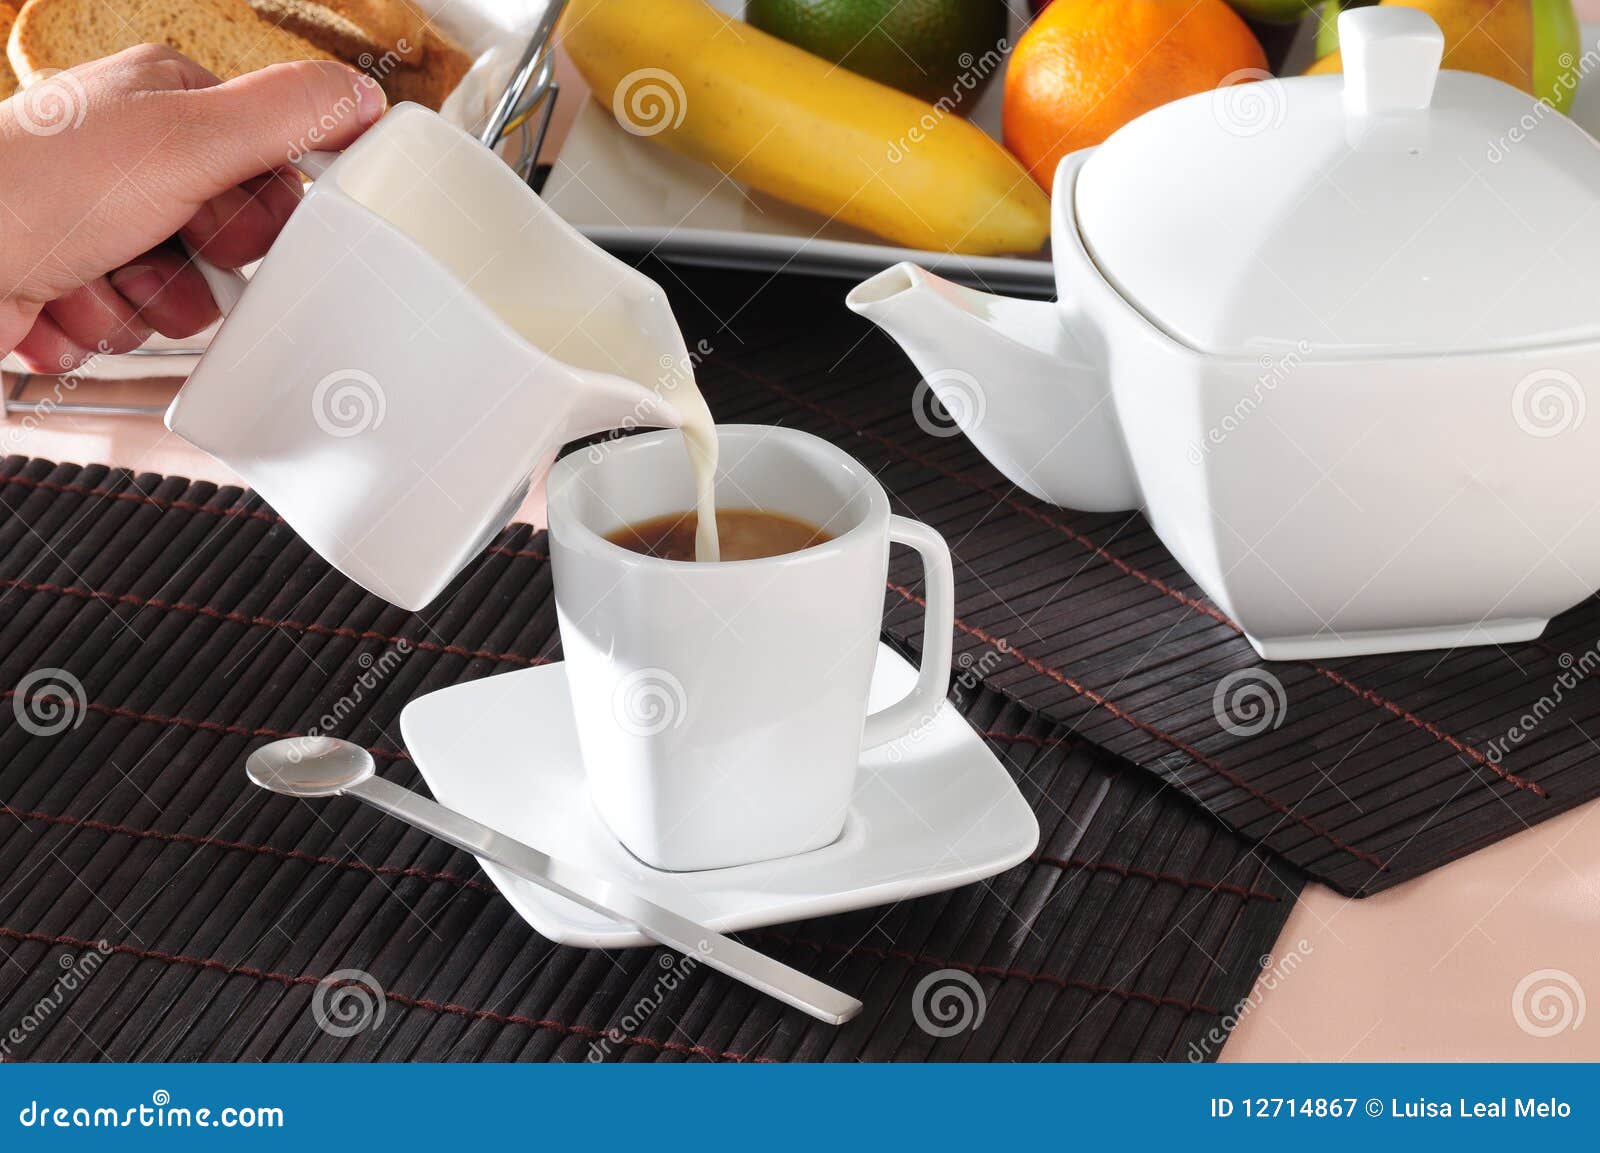 Serving Breakfast. Royalty Free Stock Photography - Image: 12714867